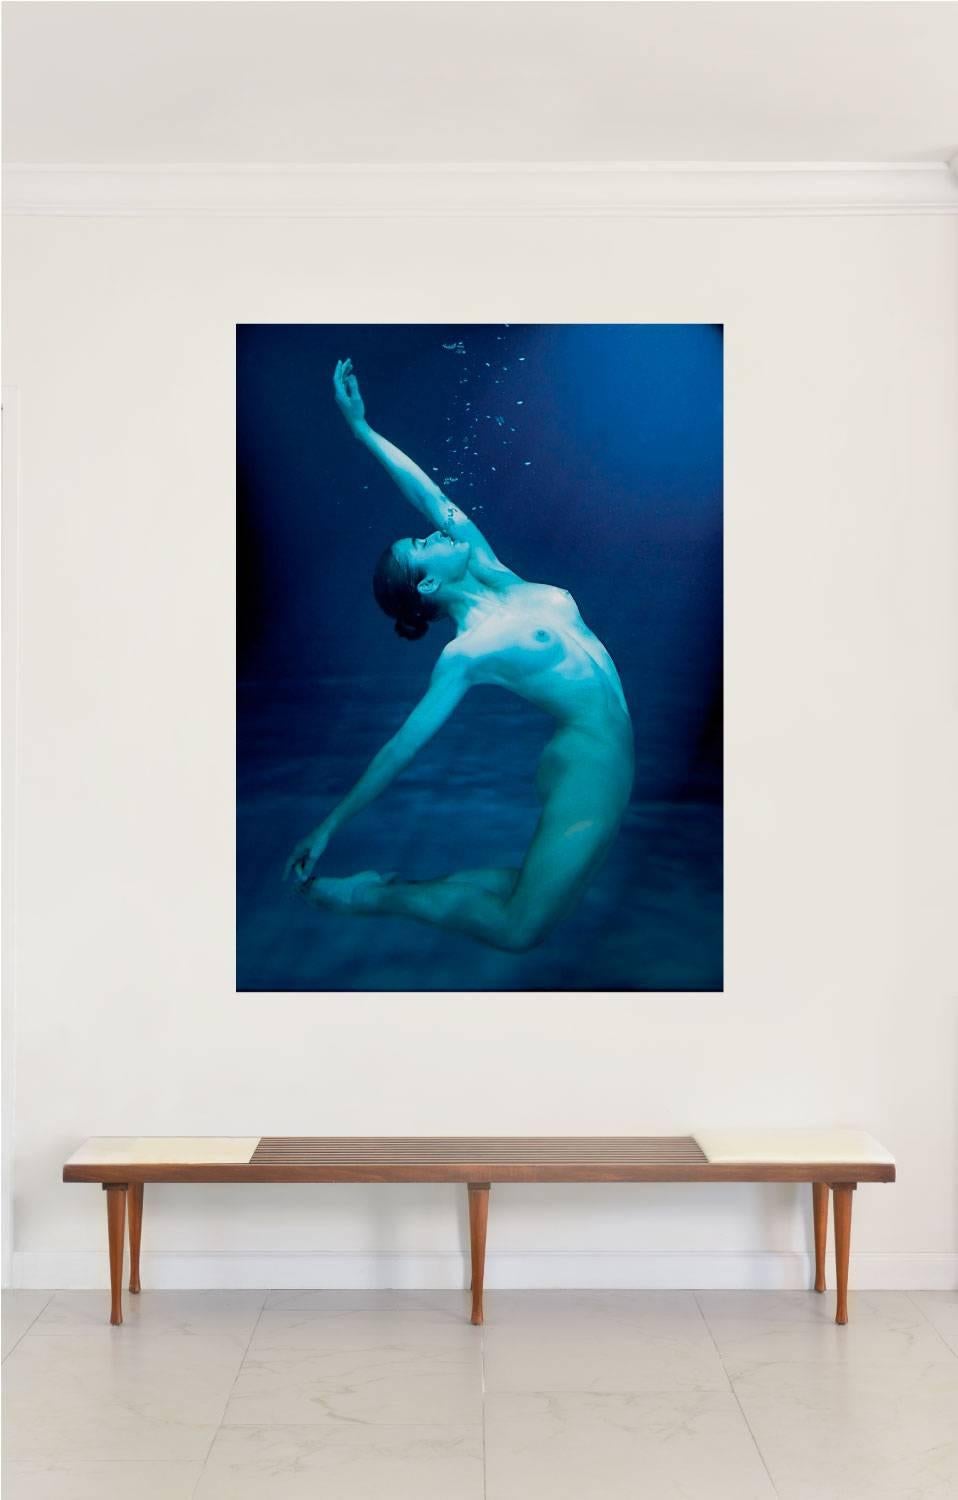 Half Angels Half Demons #6, Underwater nude limited edition color photograph - Photograph by Mauricio Velez